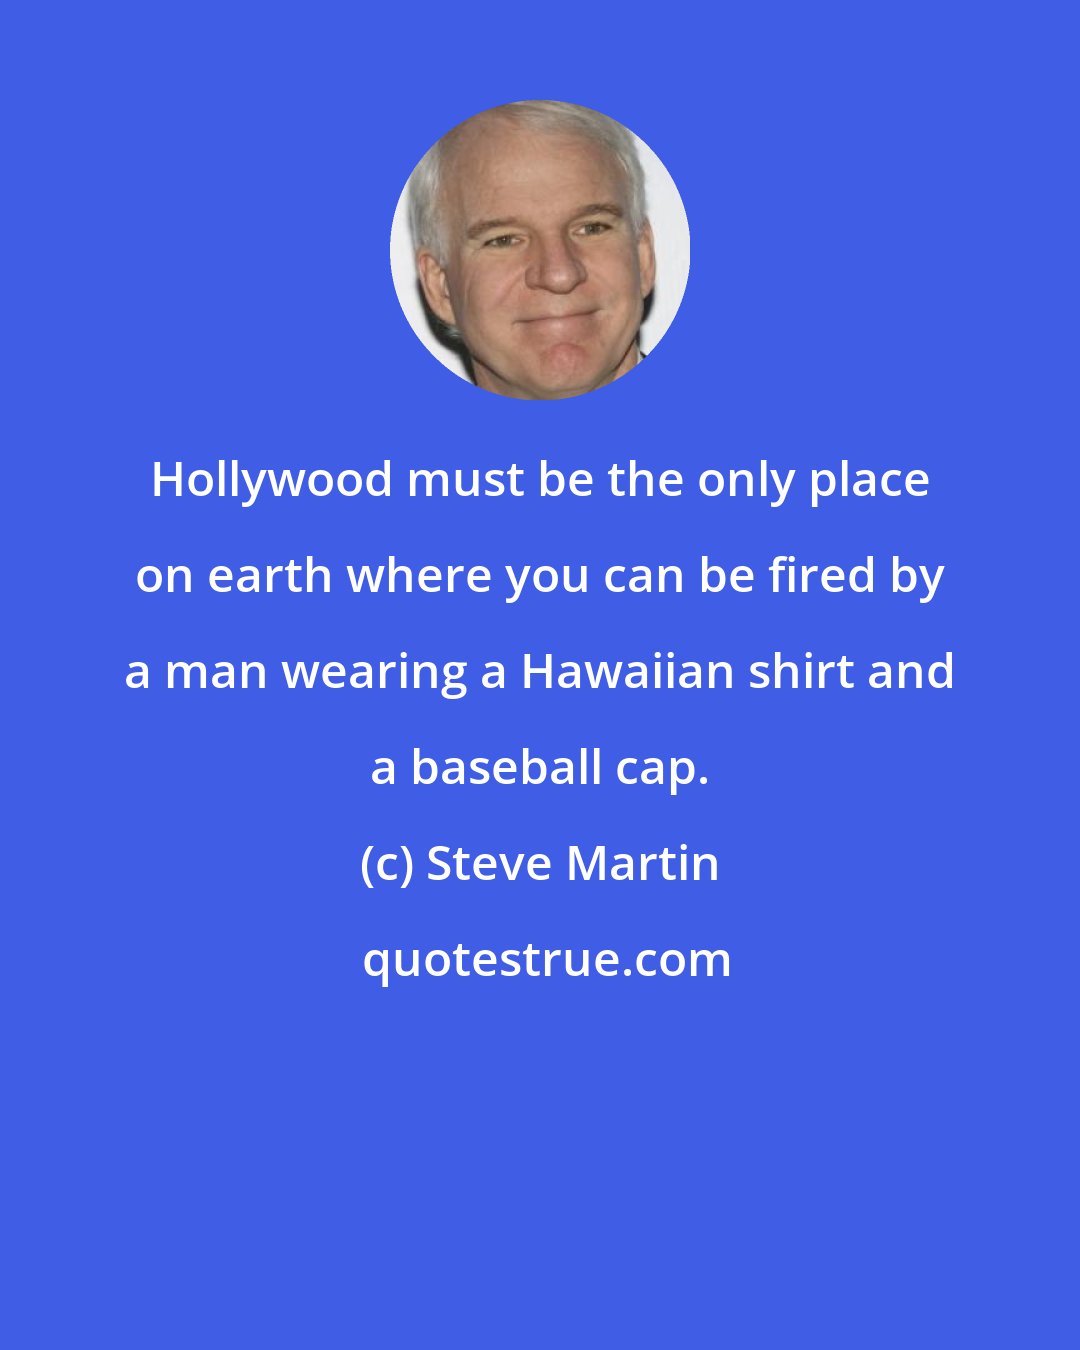 Steve Martin: Hollywood must be the only place on earth where you can be fired by a man wearing a Hawaiian shirt and a baseball cap.